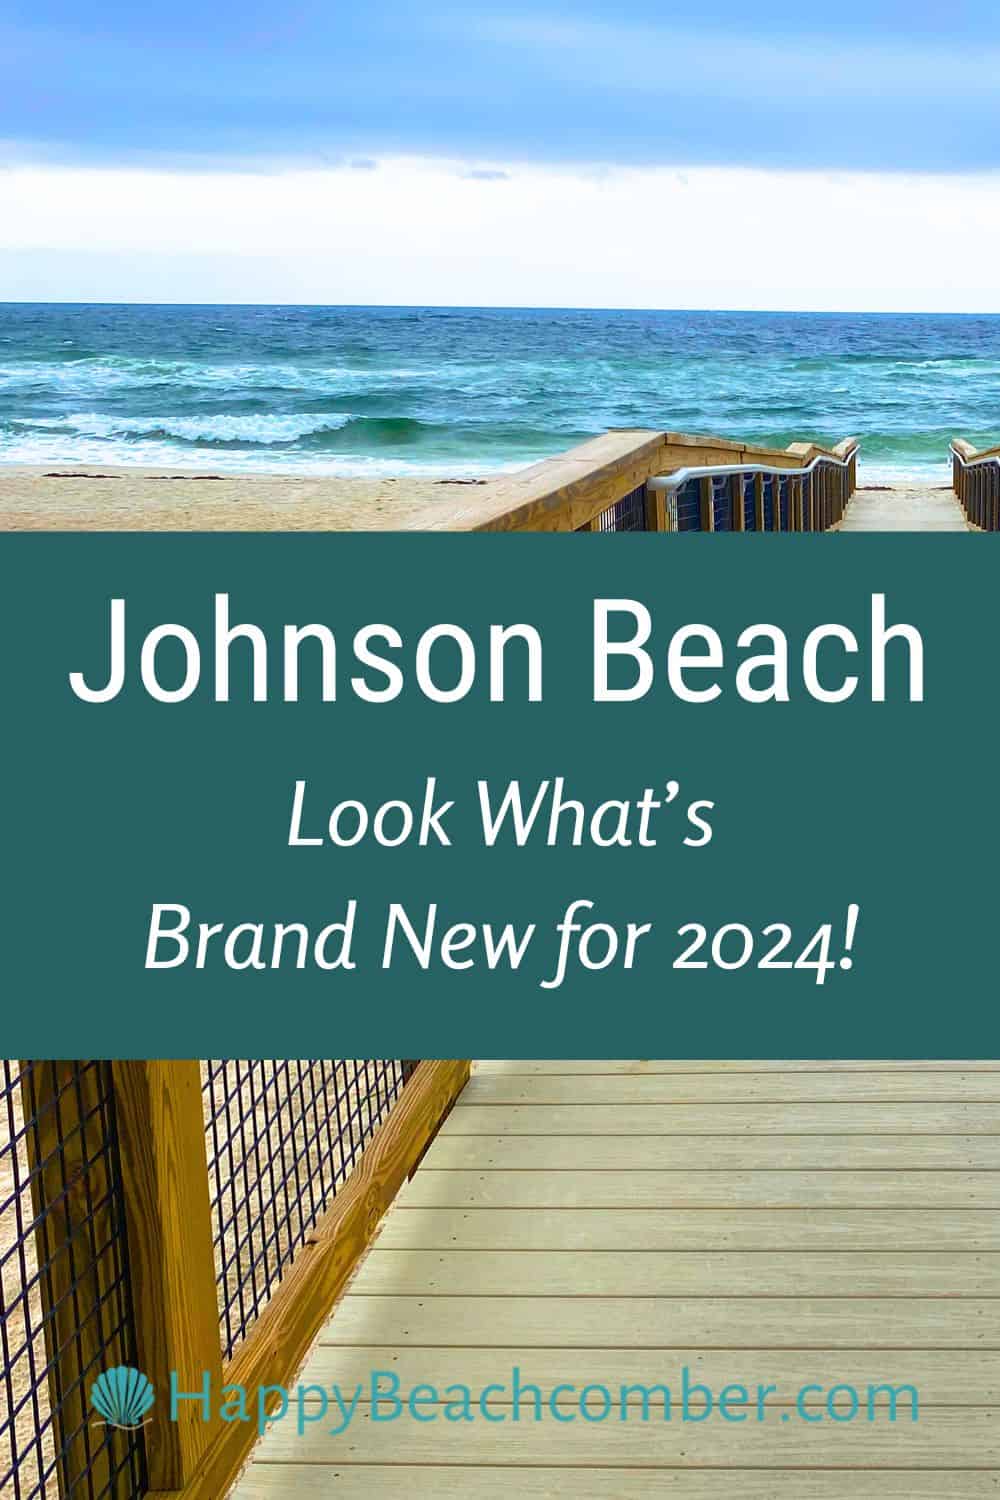 Johnson Beach - Look what's new in 2024!